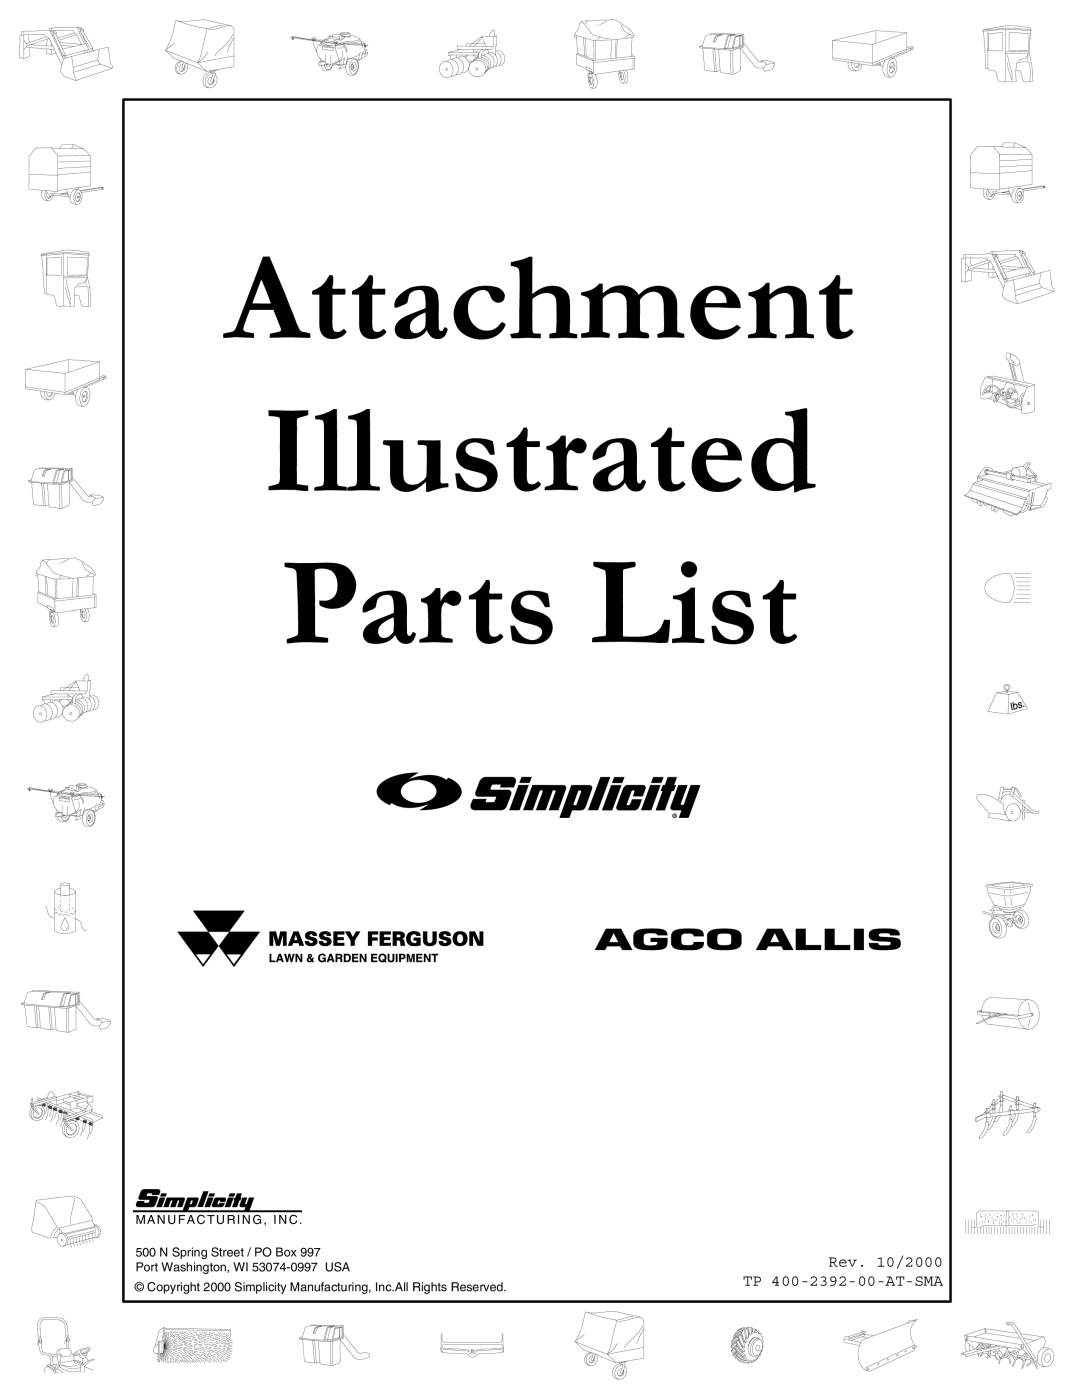 Snapper manual Attachment Illustrated Parts List, Rev. 10/2000 TP 400-2392-00-AT-SMA, M A N U F A C T U R I N G , I N C 